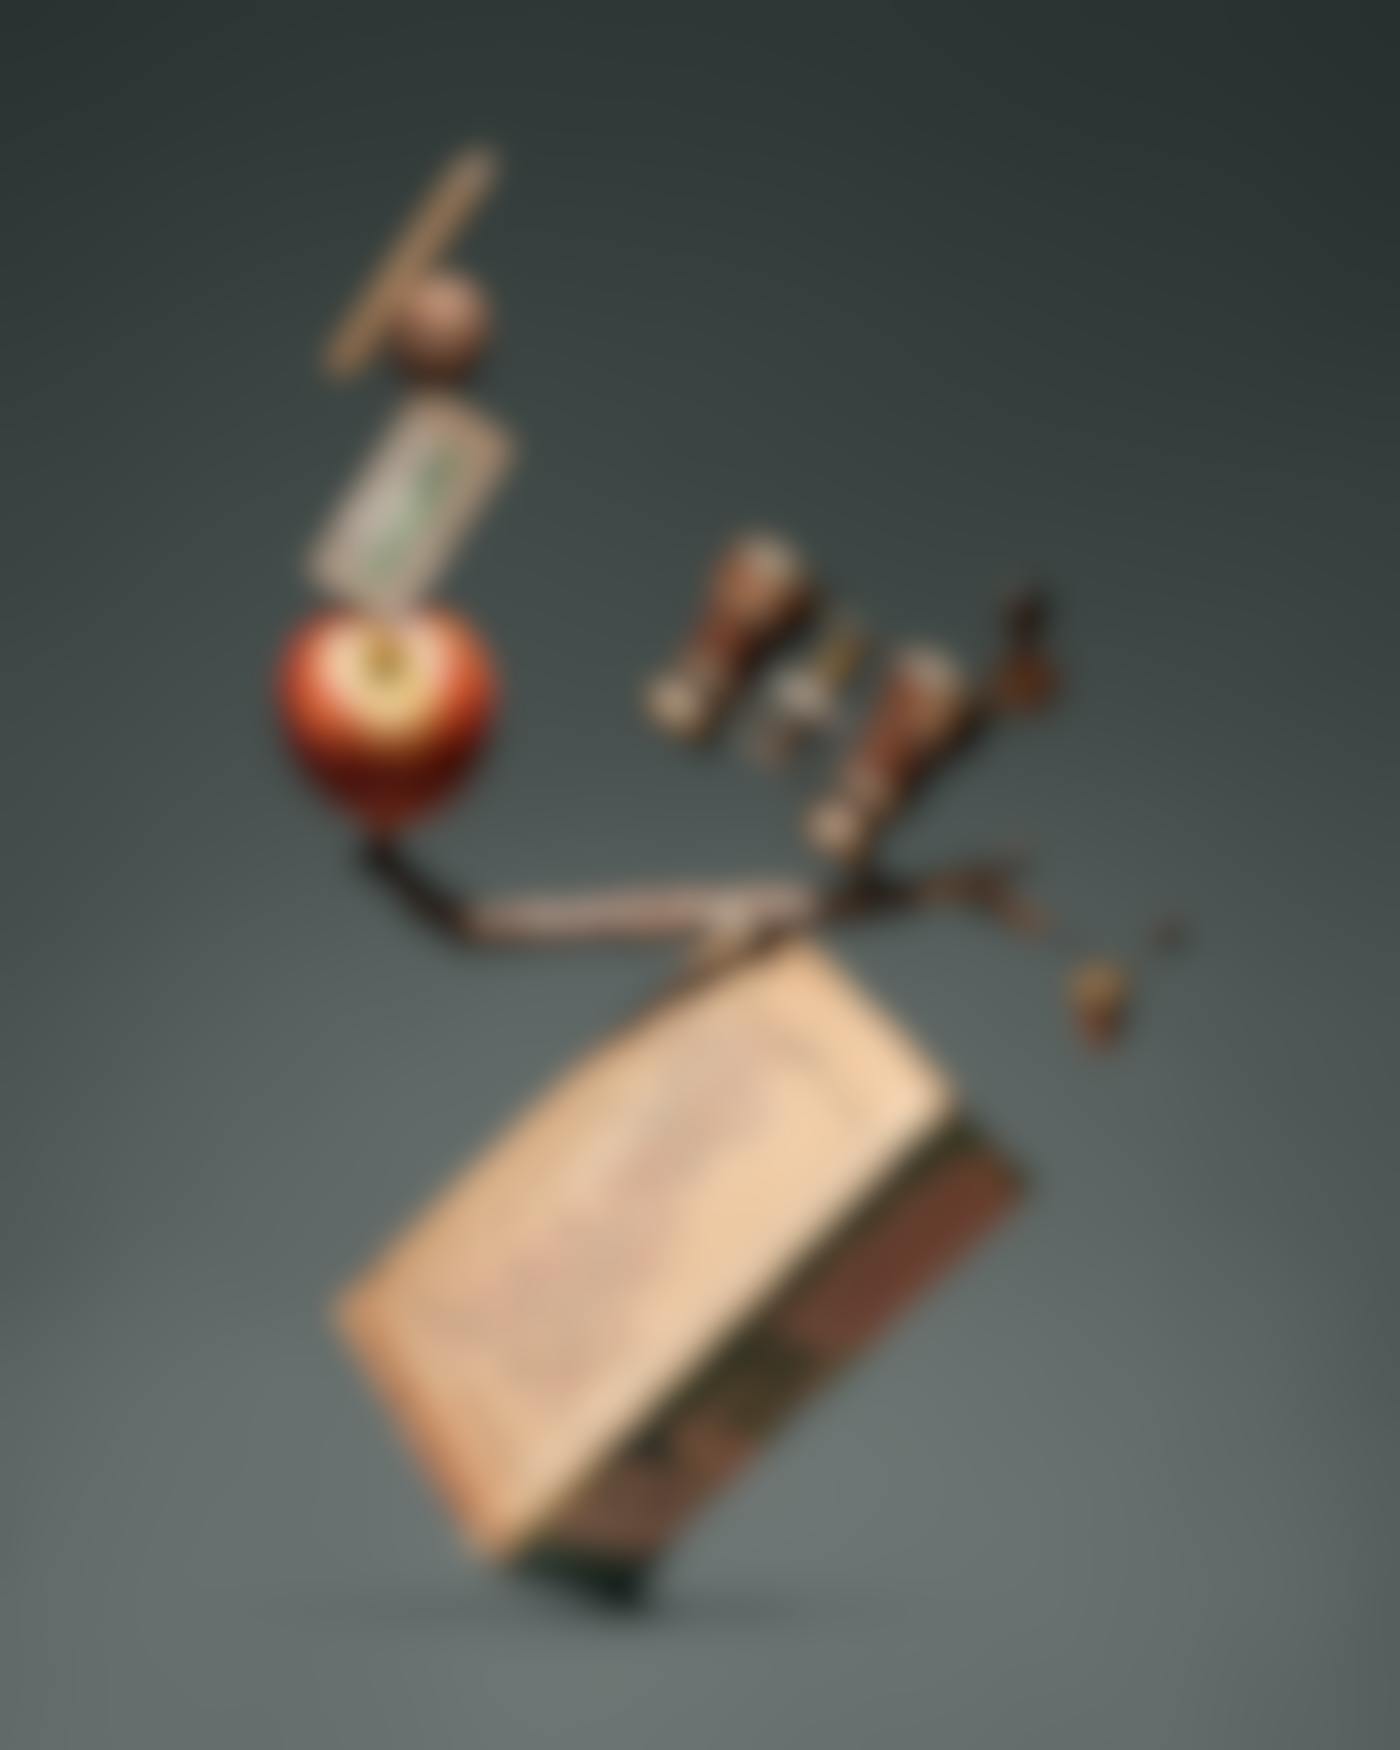 A pencil, walnut, apple, twig, opera glasses and a road map all tumbling together